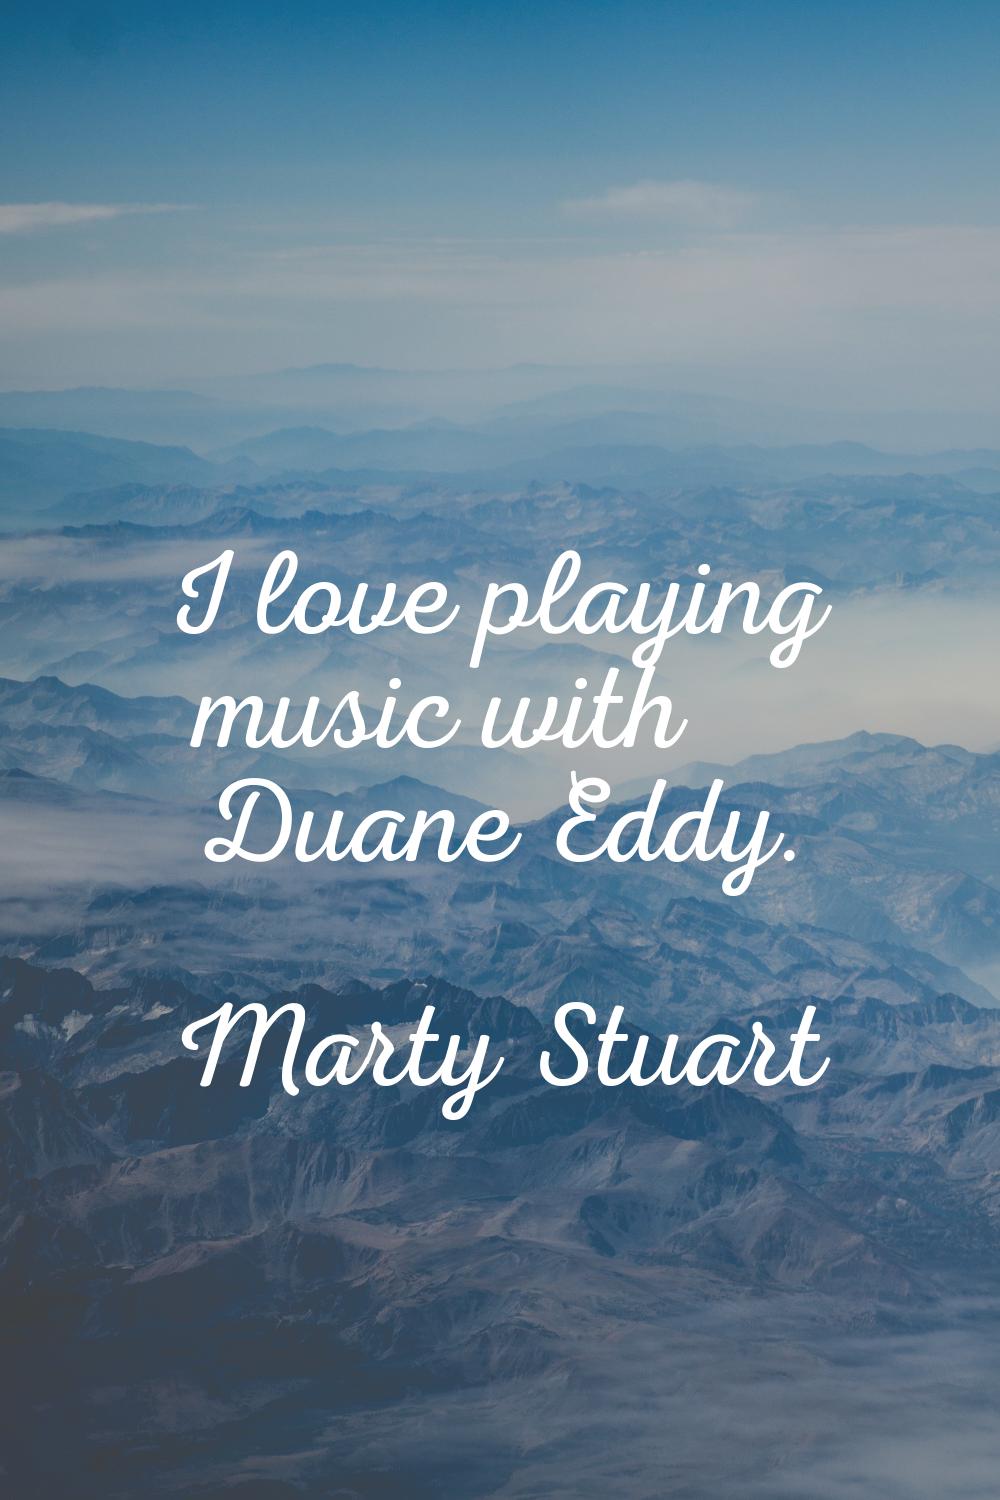 I love playing music with Duane Eddy.